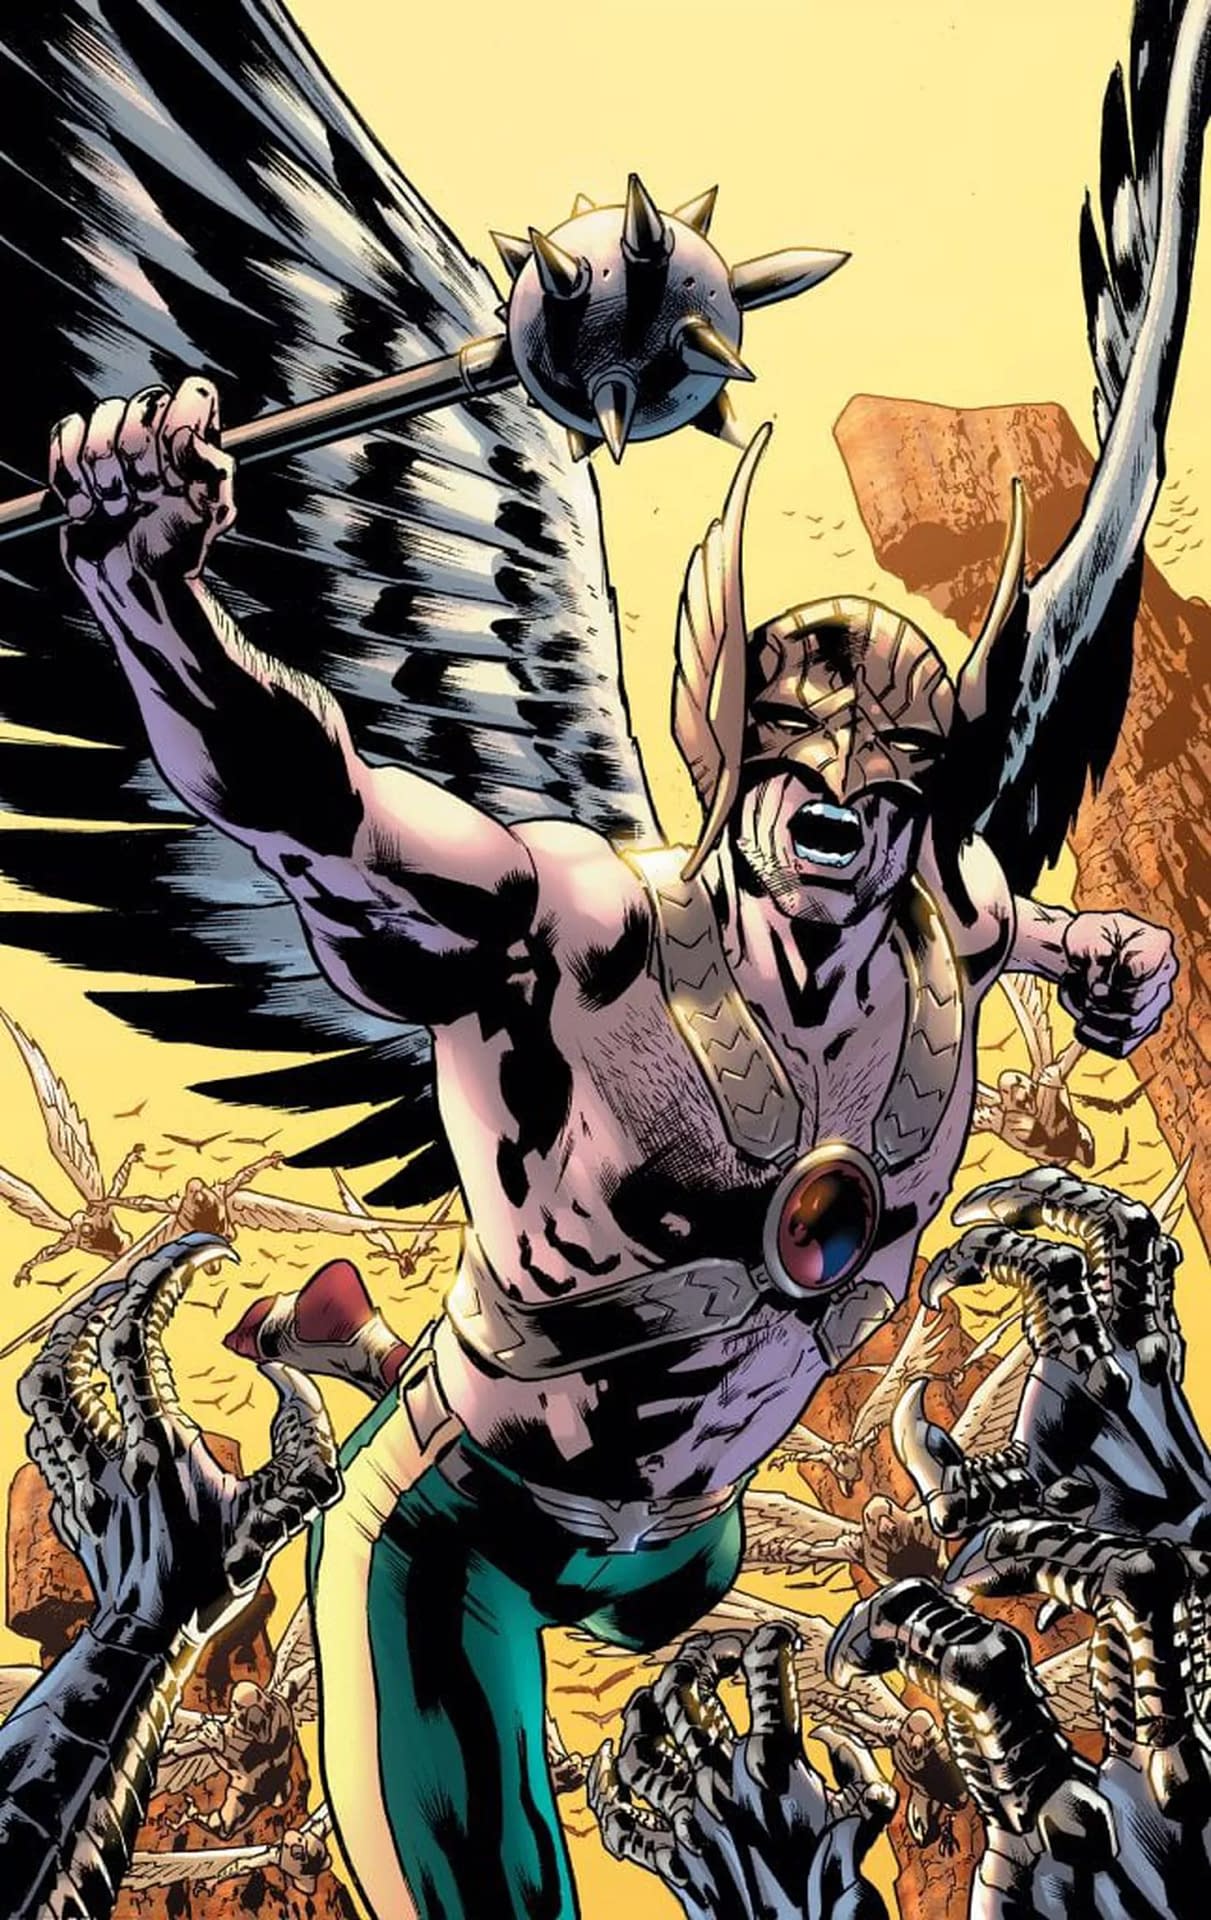 Bryan Hitch and Robert Venditti Confirmed on New Hawkman Monthly Comic